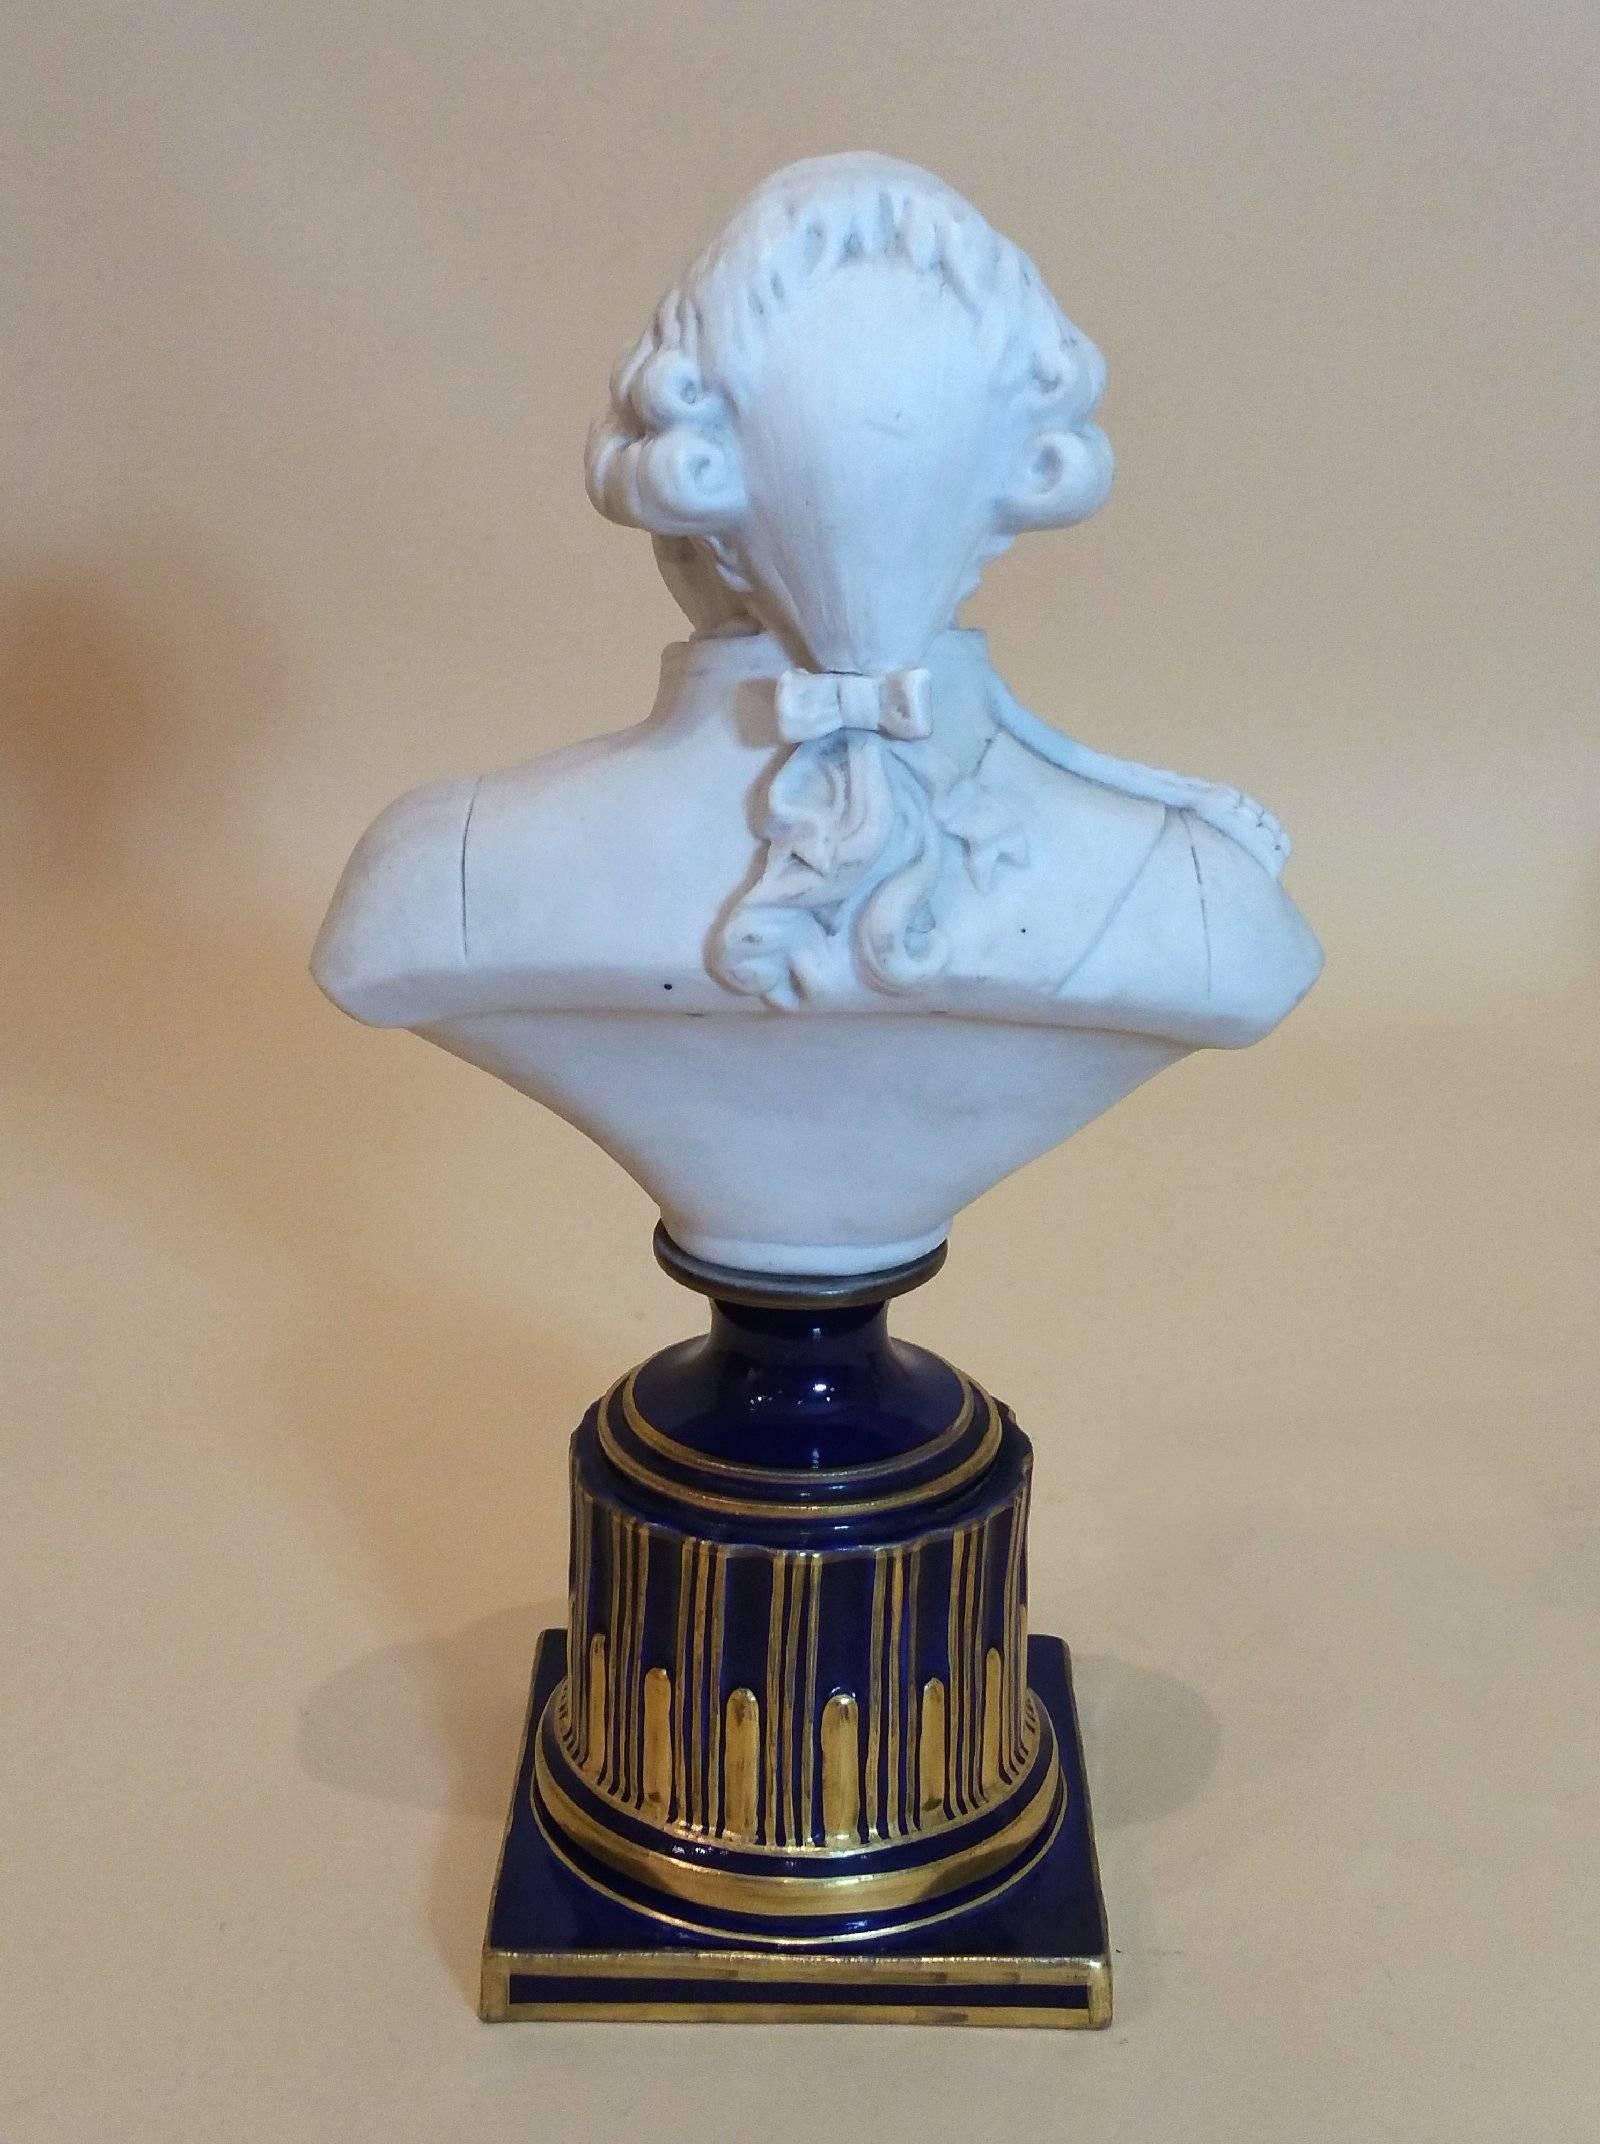 Pair of 18th C. Sevres Porcelain Busts of Louis XVI and Marie Antoinette  2